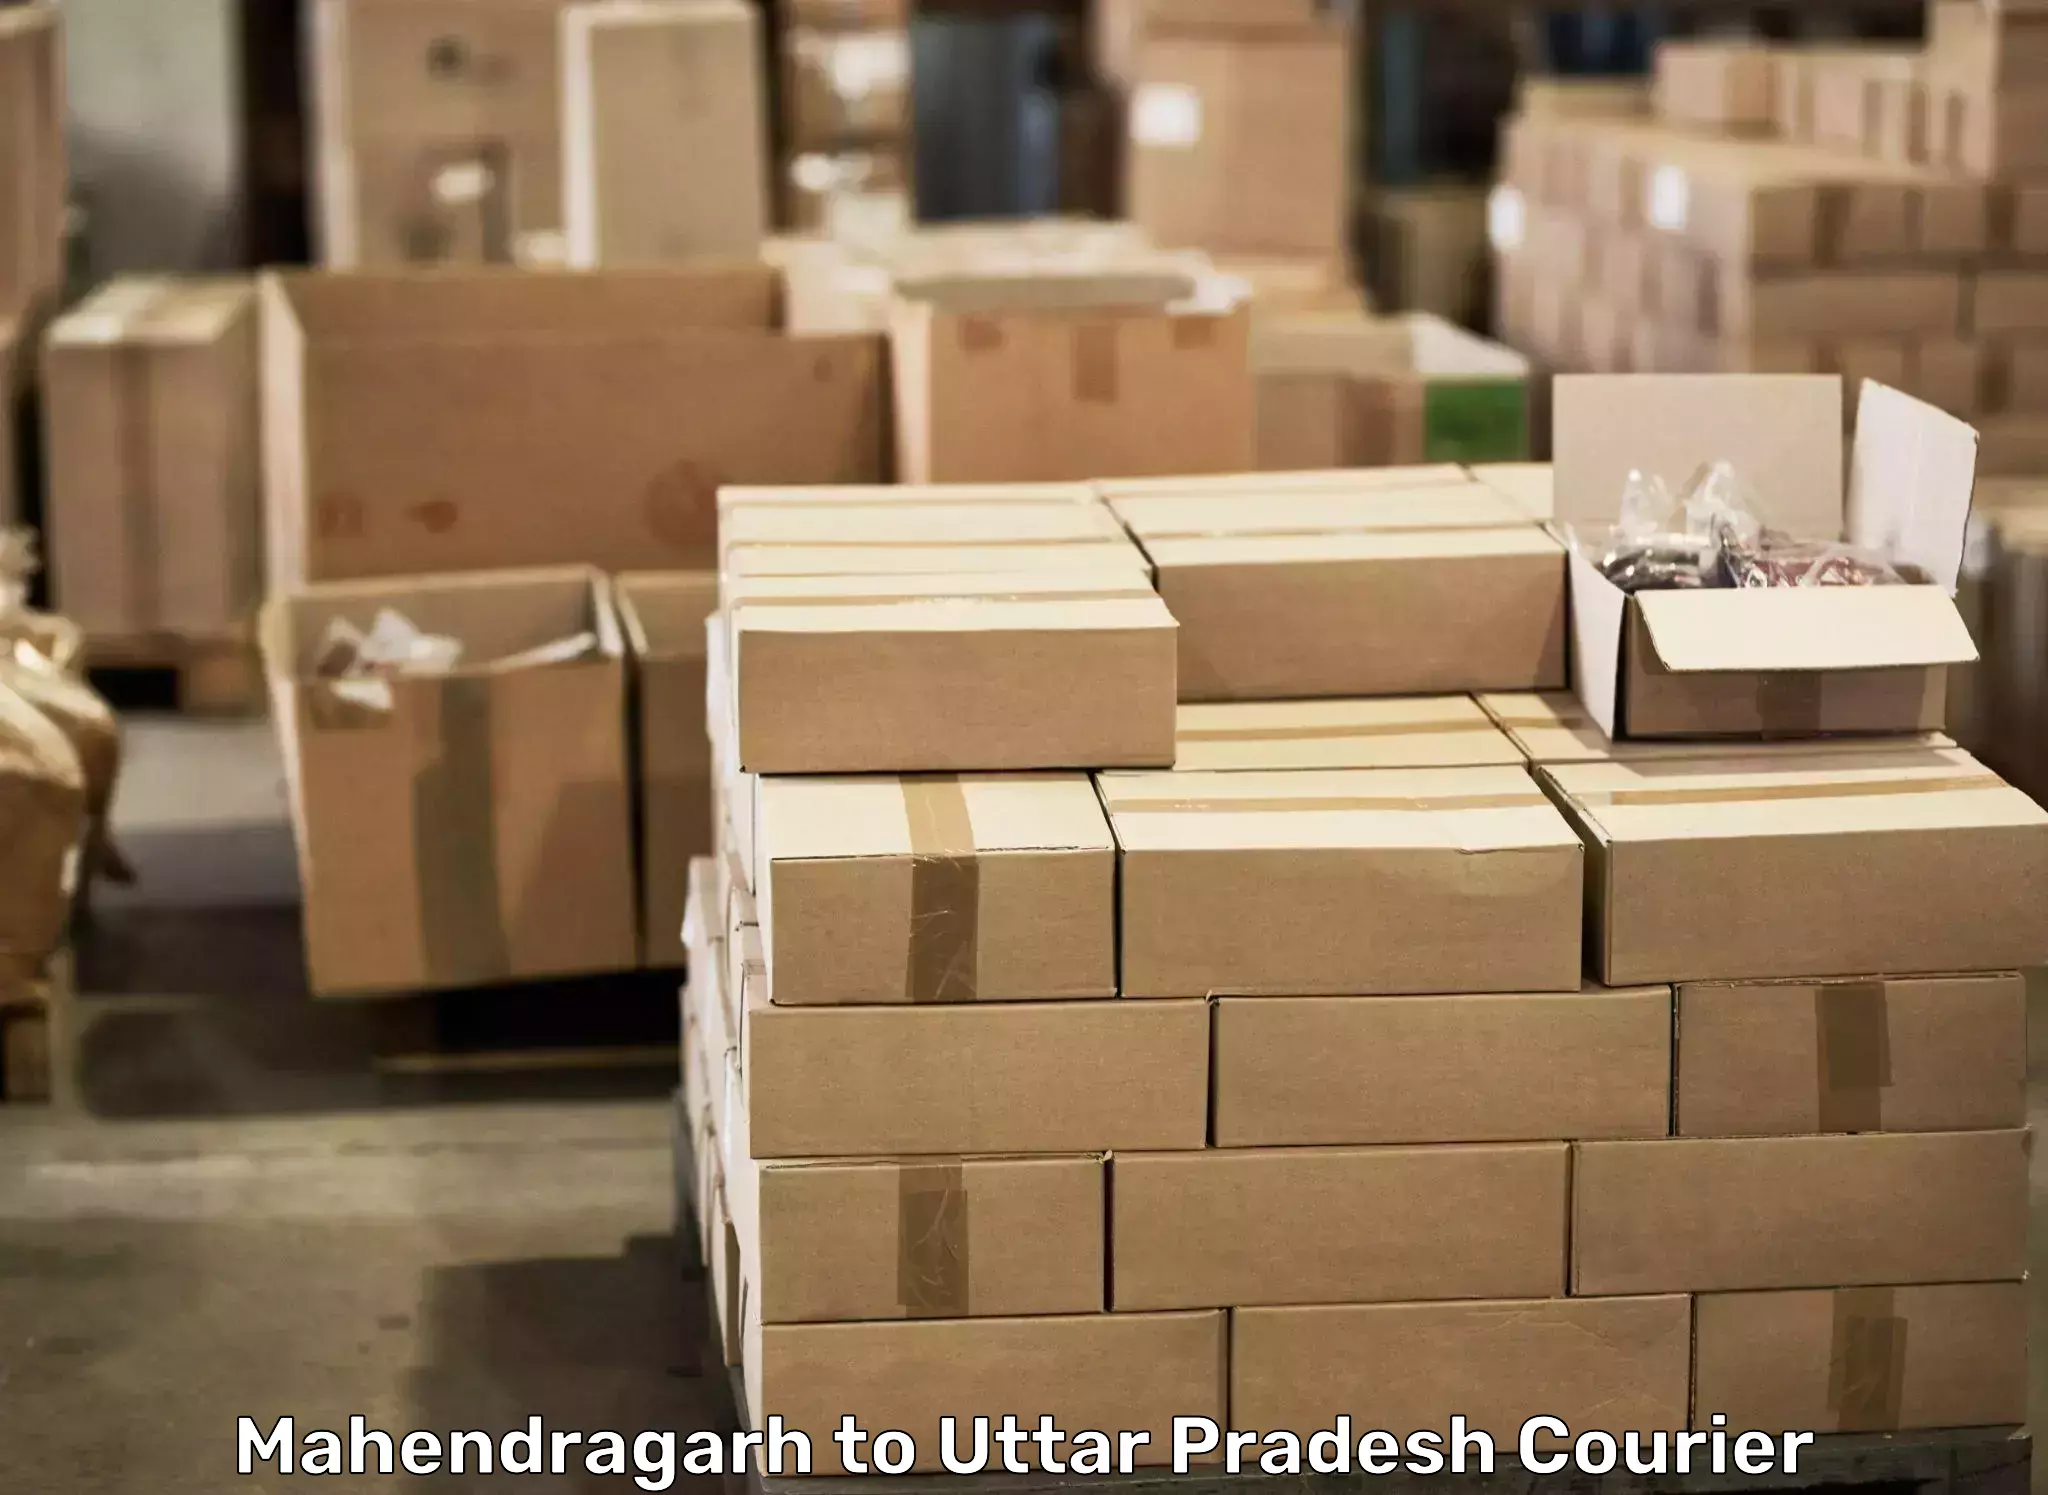 Comprehensive relocation services in Mahendragarh to Sarai Meer